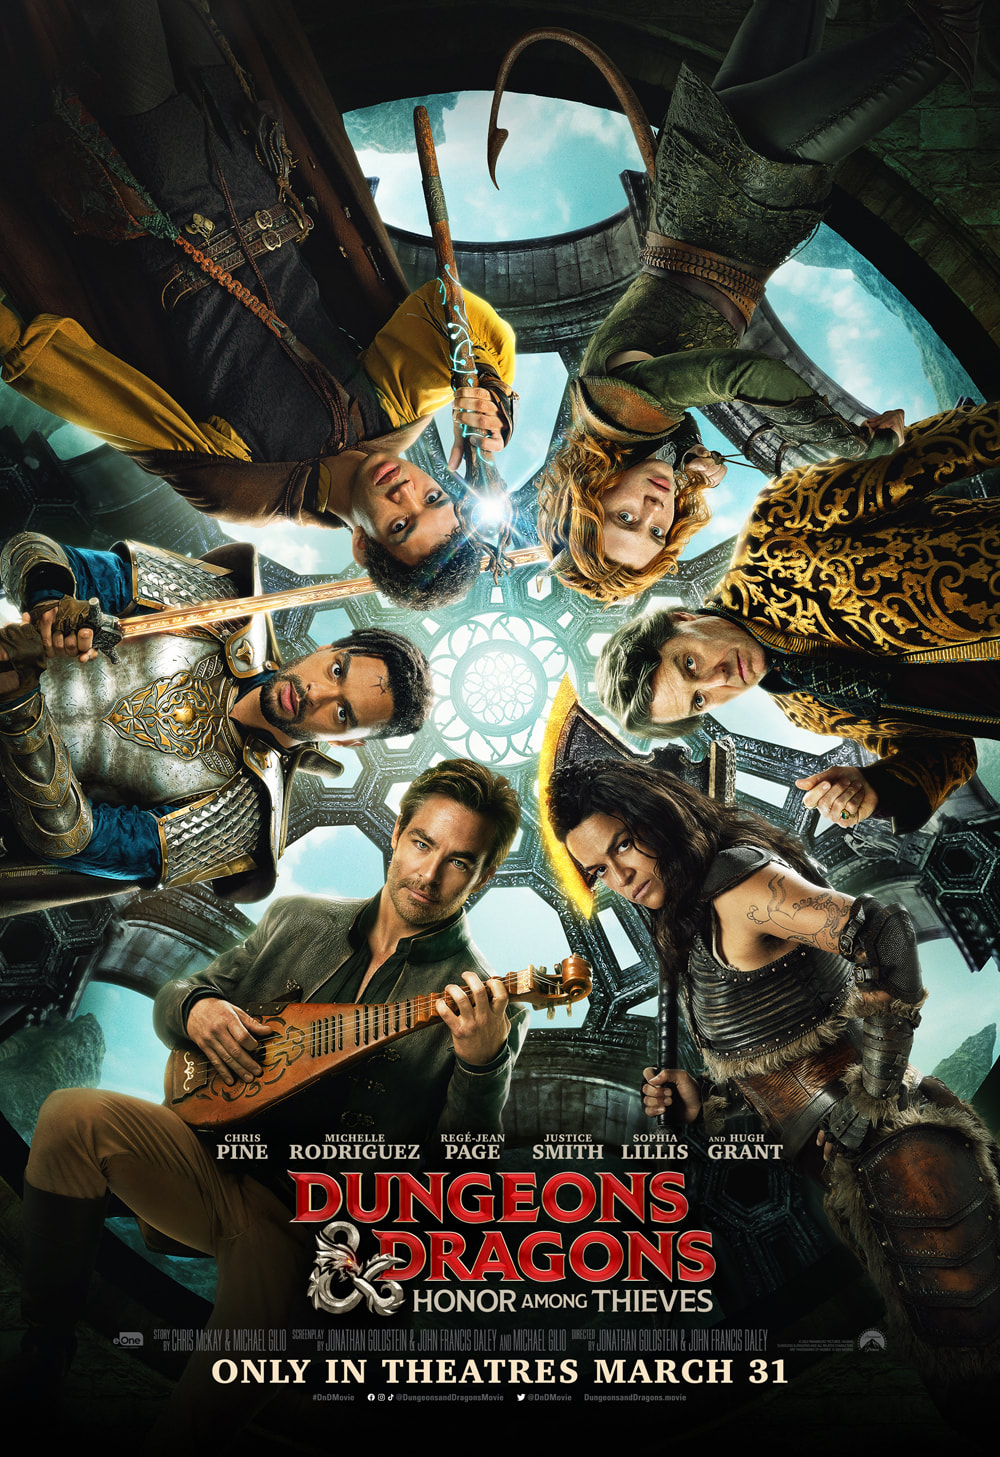 Dungeons & Dragons: Honor Among Thieves premieres March 31, 2023